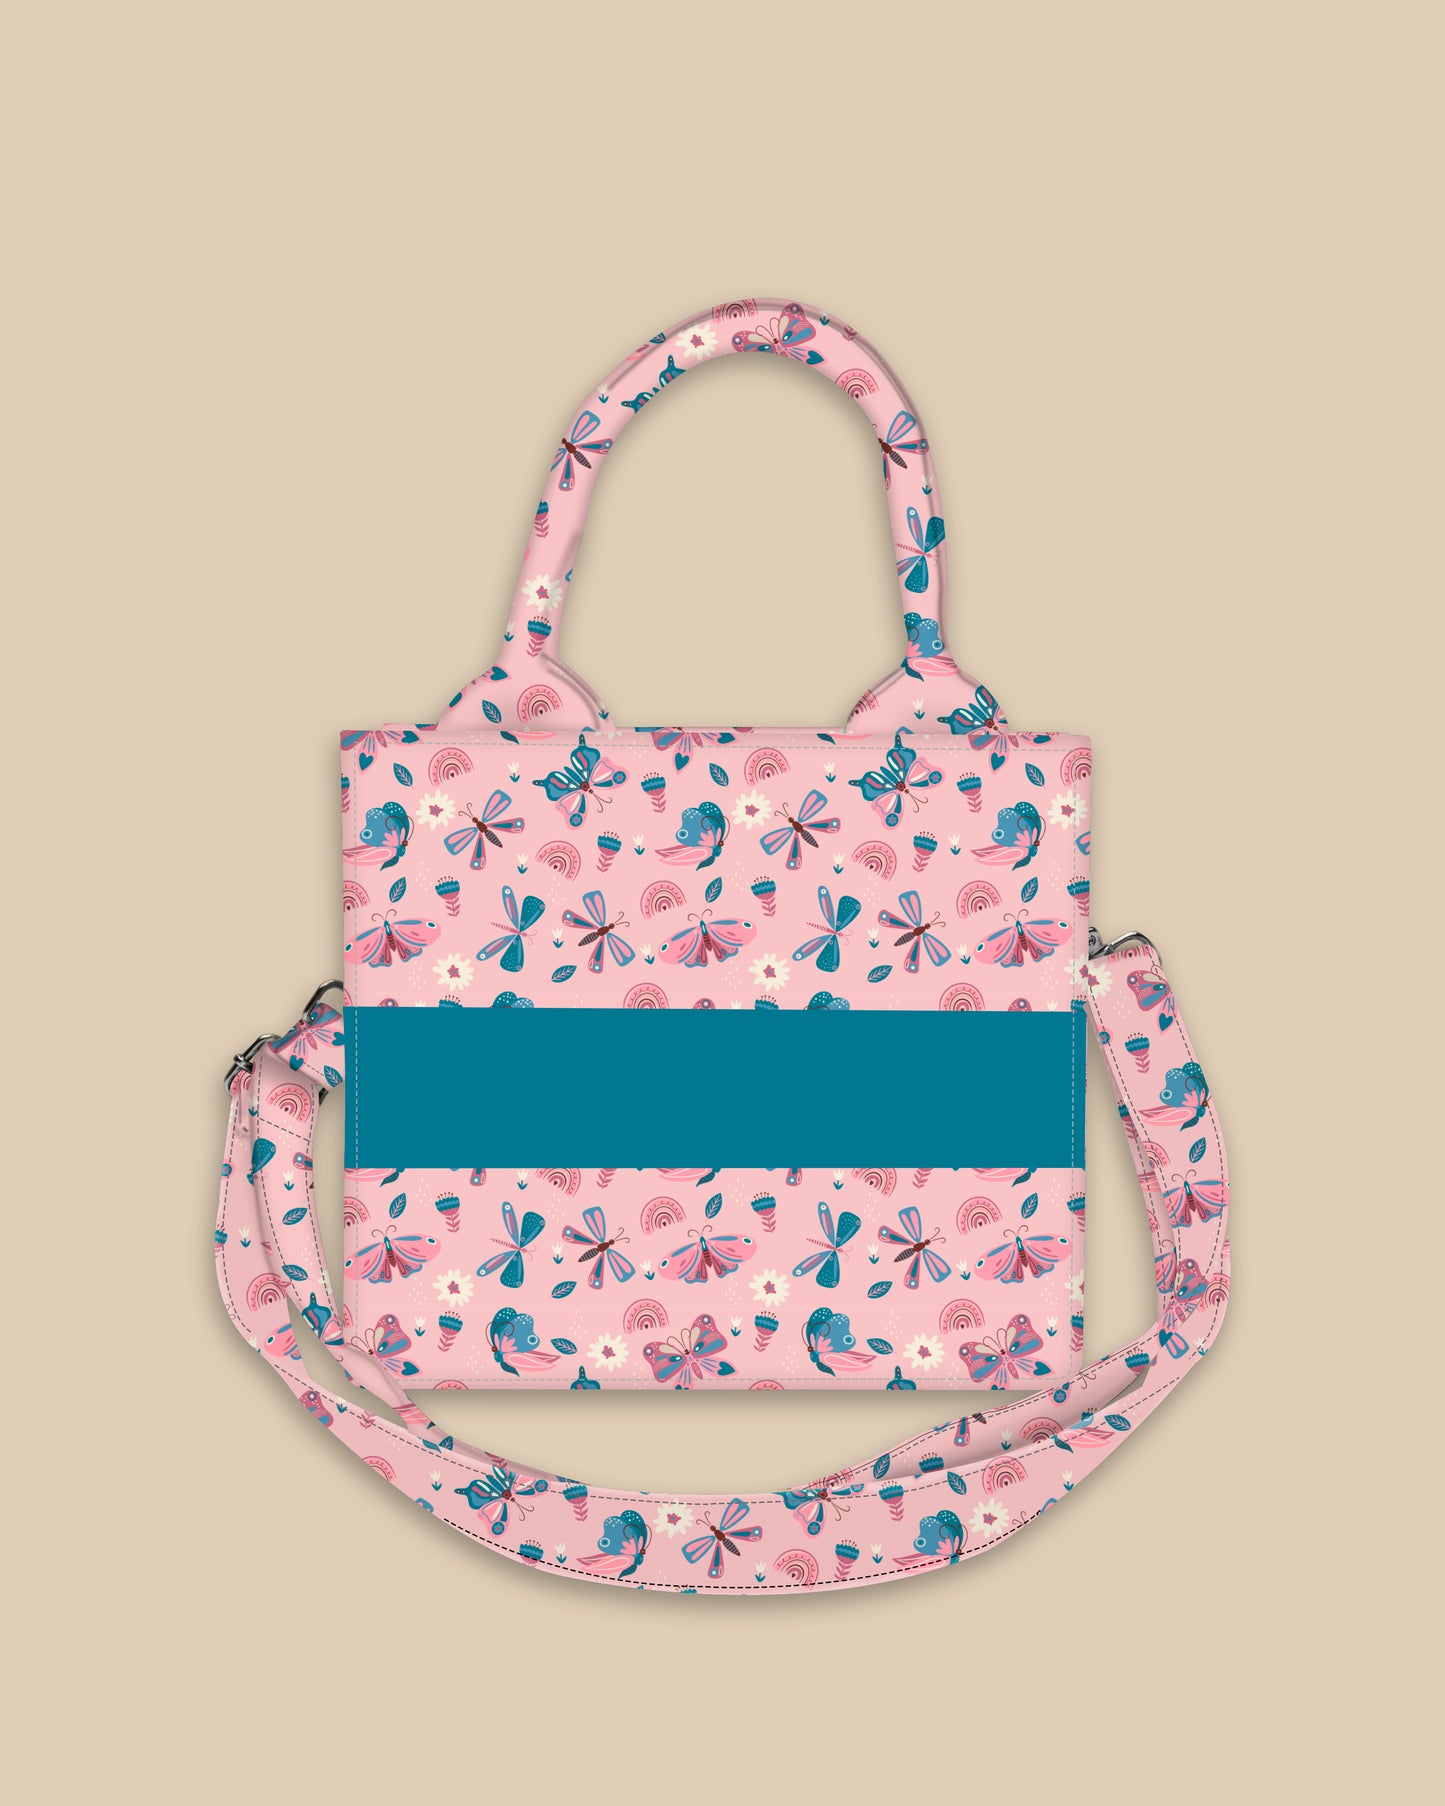 Customized Small Tote Bag Designed with Elegant Blues And Pink Butterflies